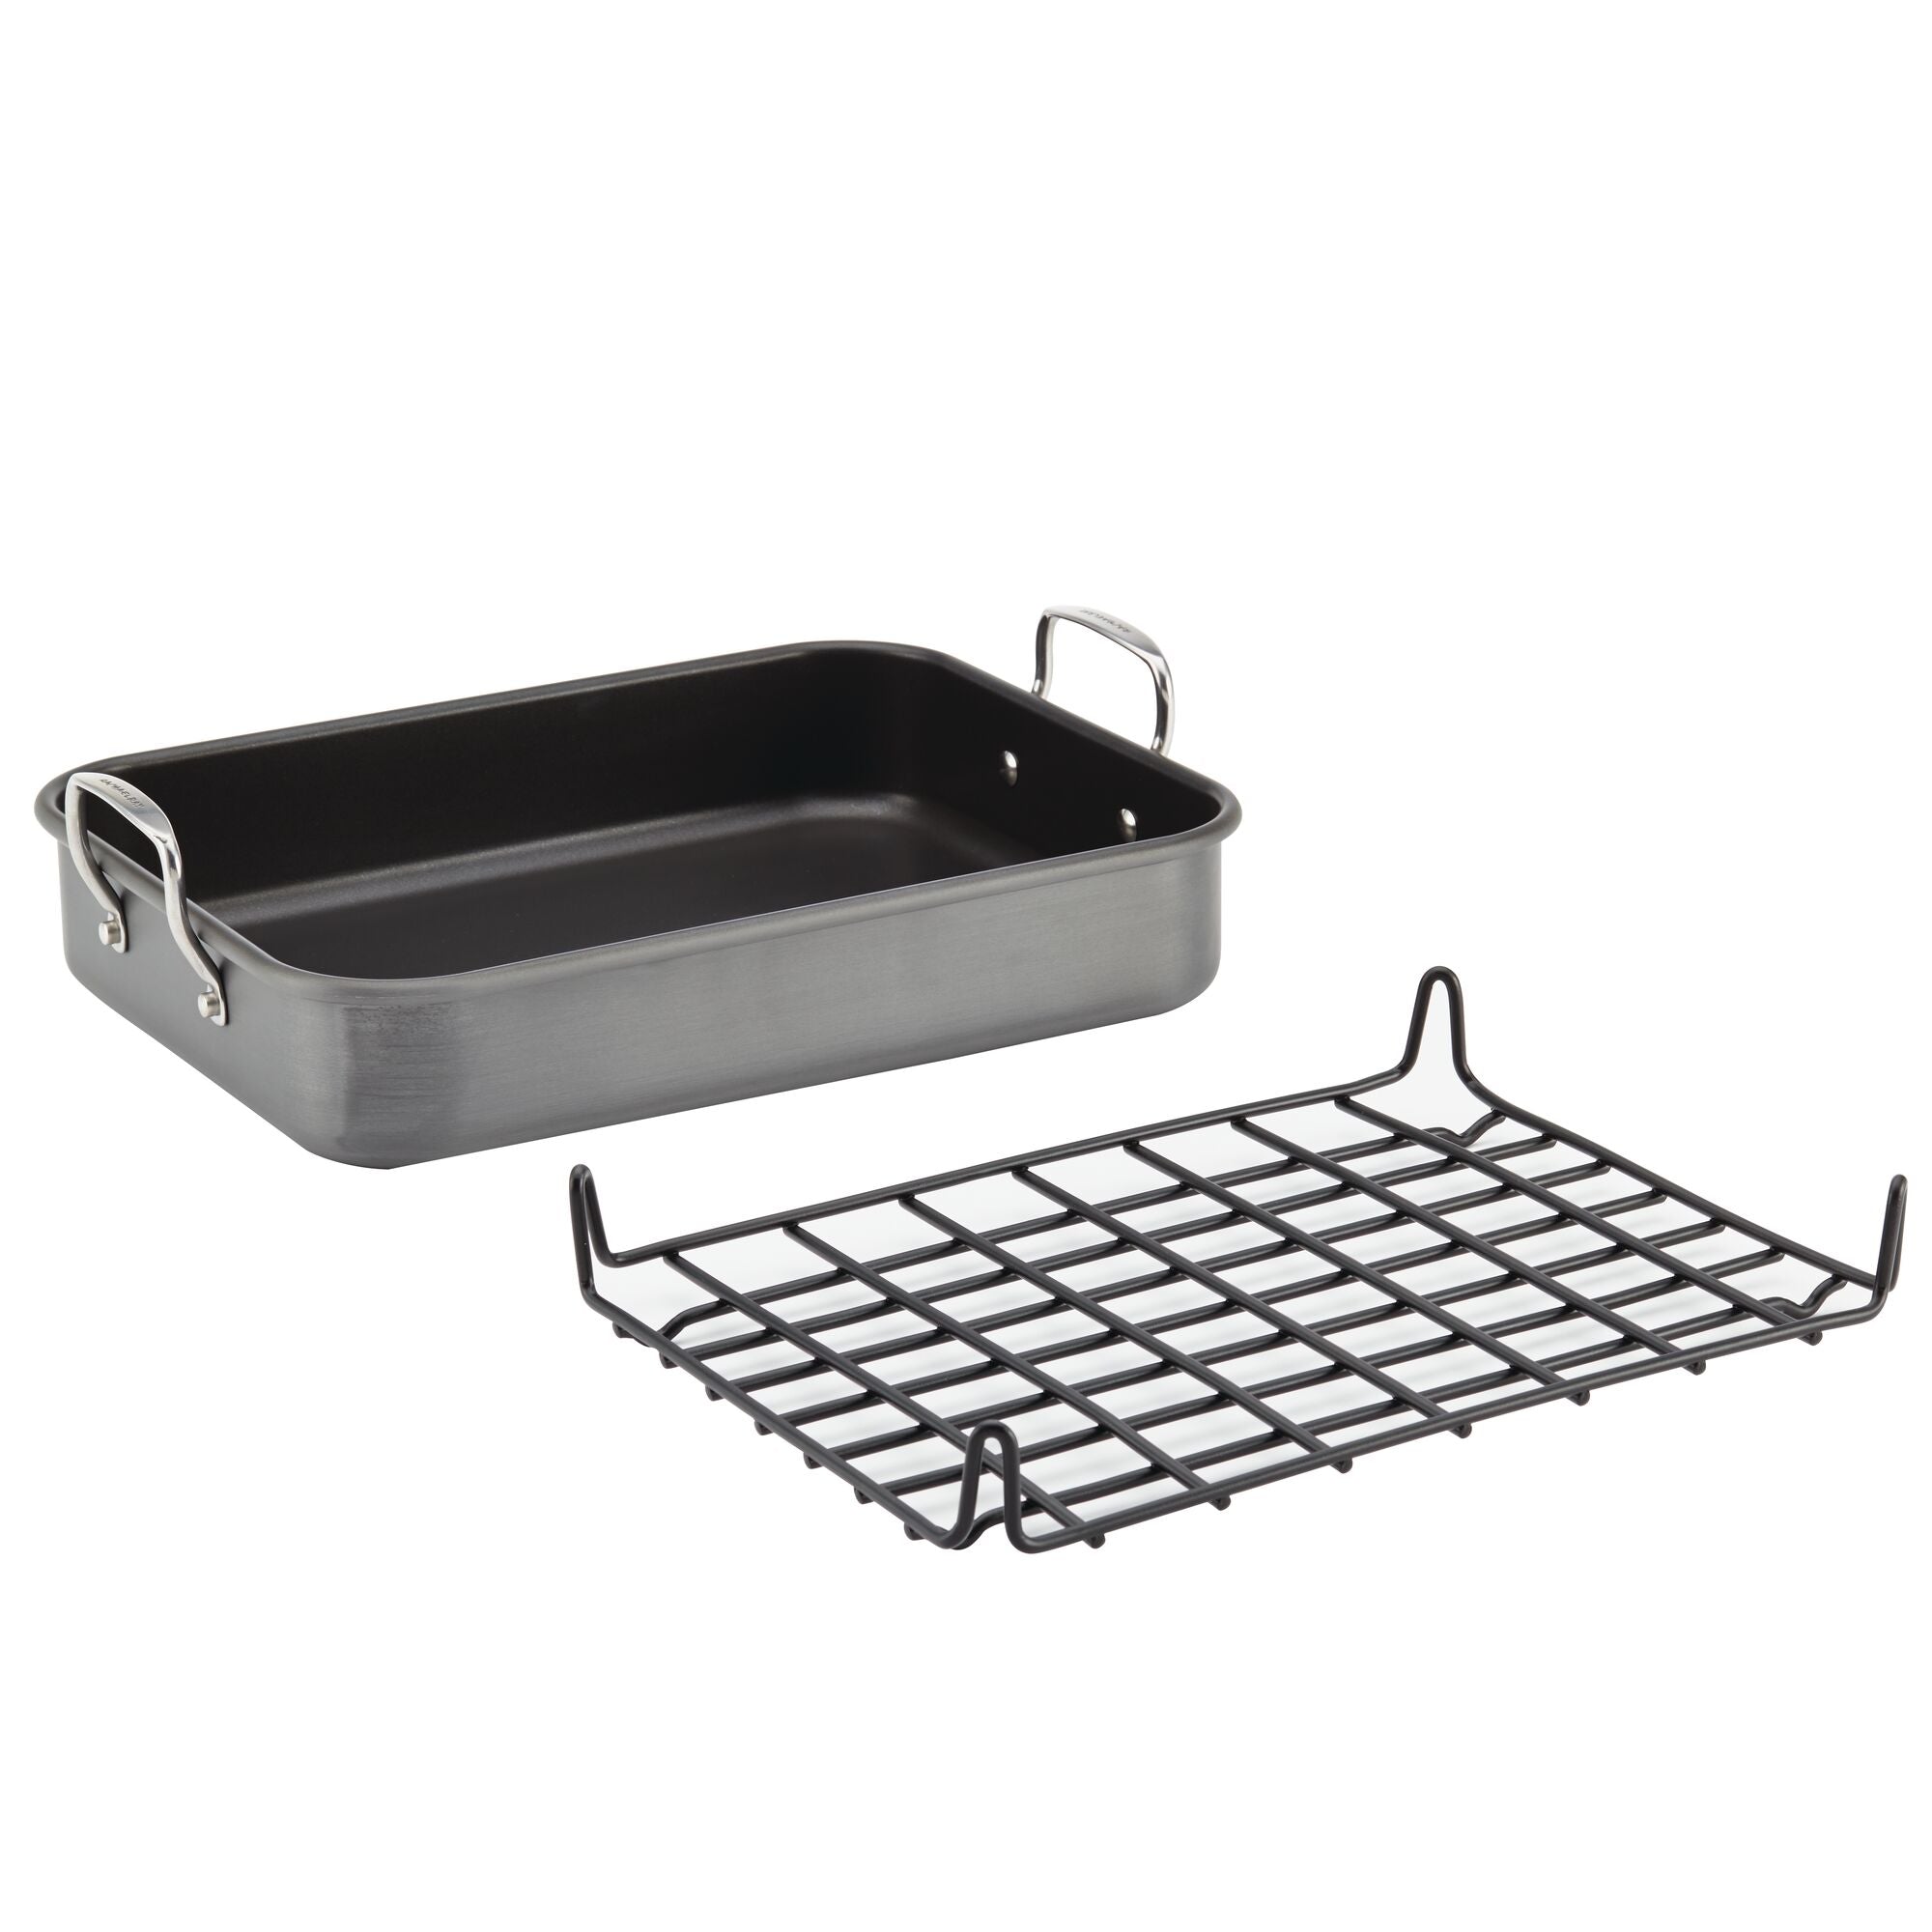 Bakeley Roasting Pan with Rack, 11-Inch Non-Stick Square Shallow Dish Sheet  Pan with Wire Rack for Oven Baking, BBQ and Roasting 11.2 x 11.2 x 1.3